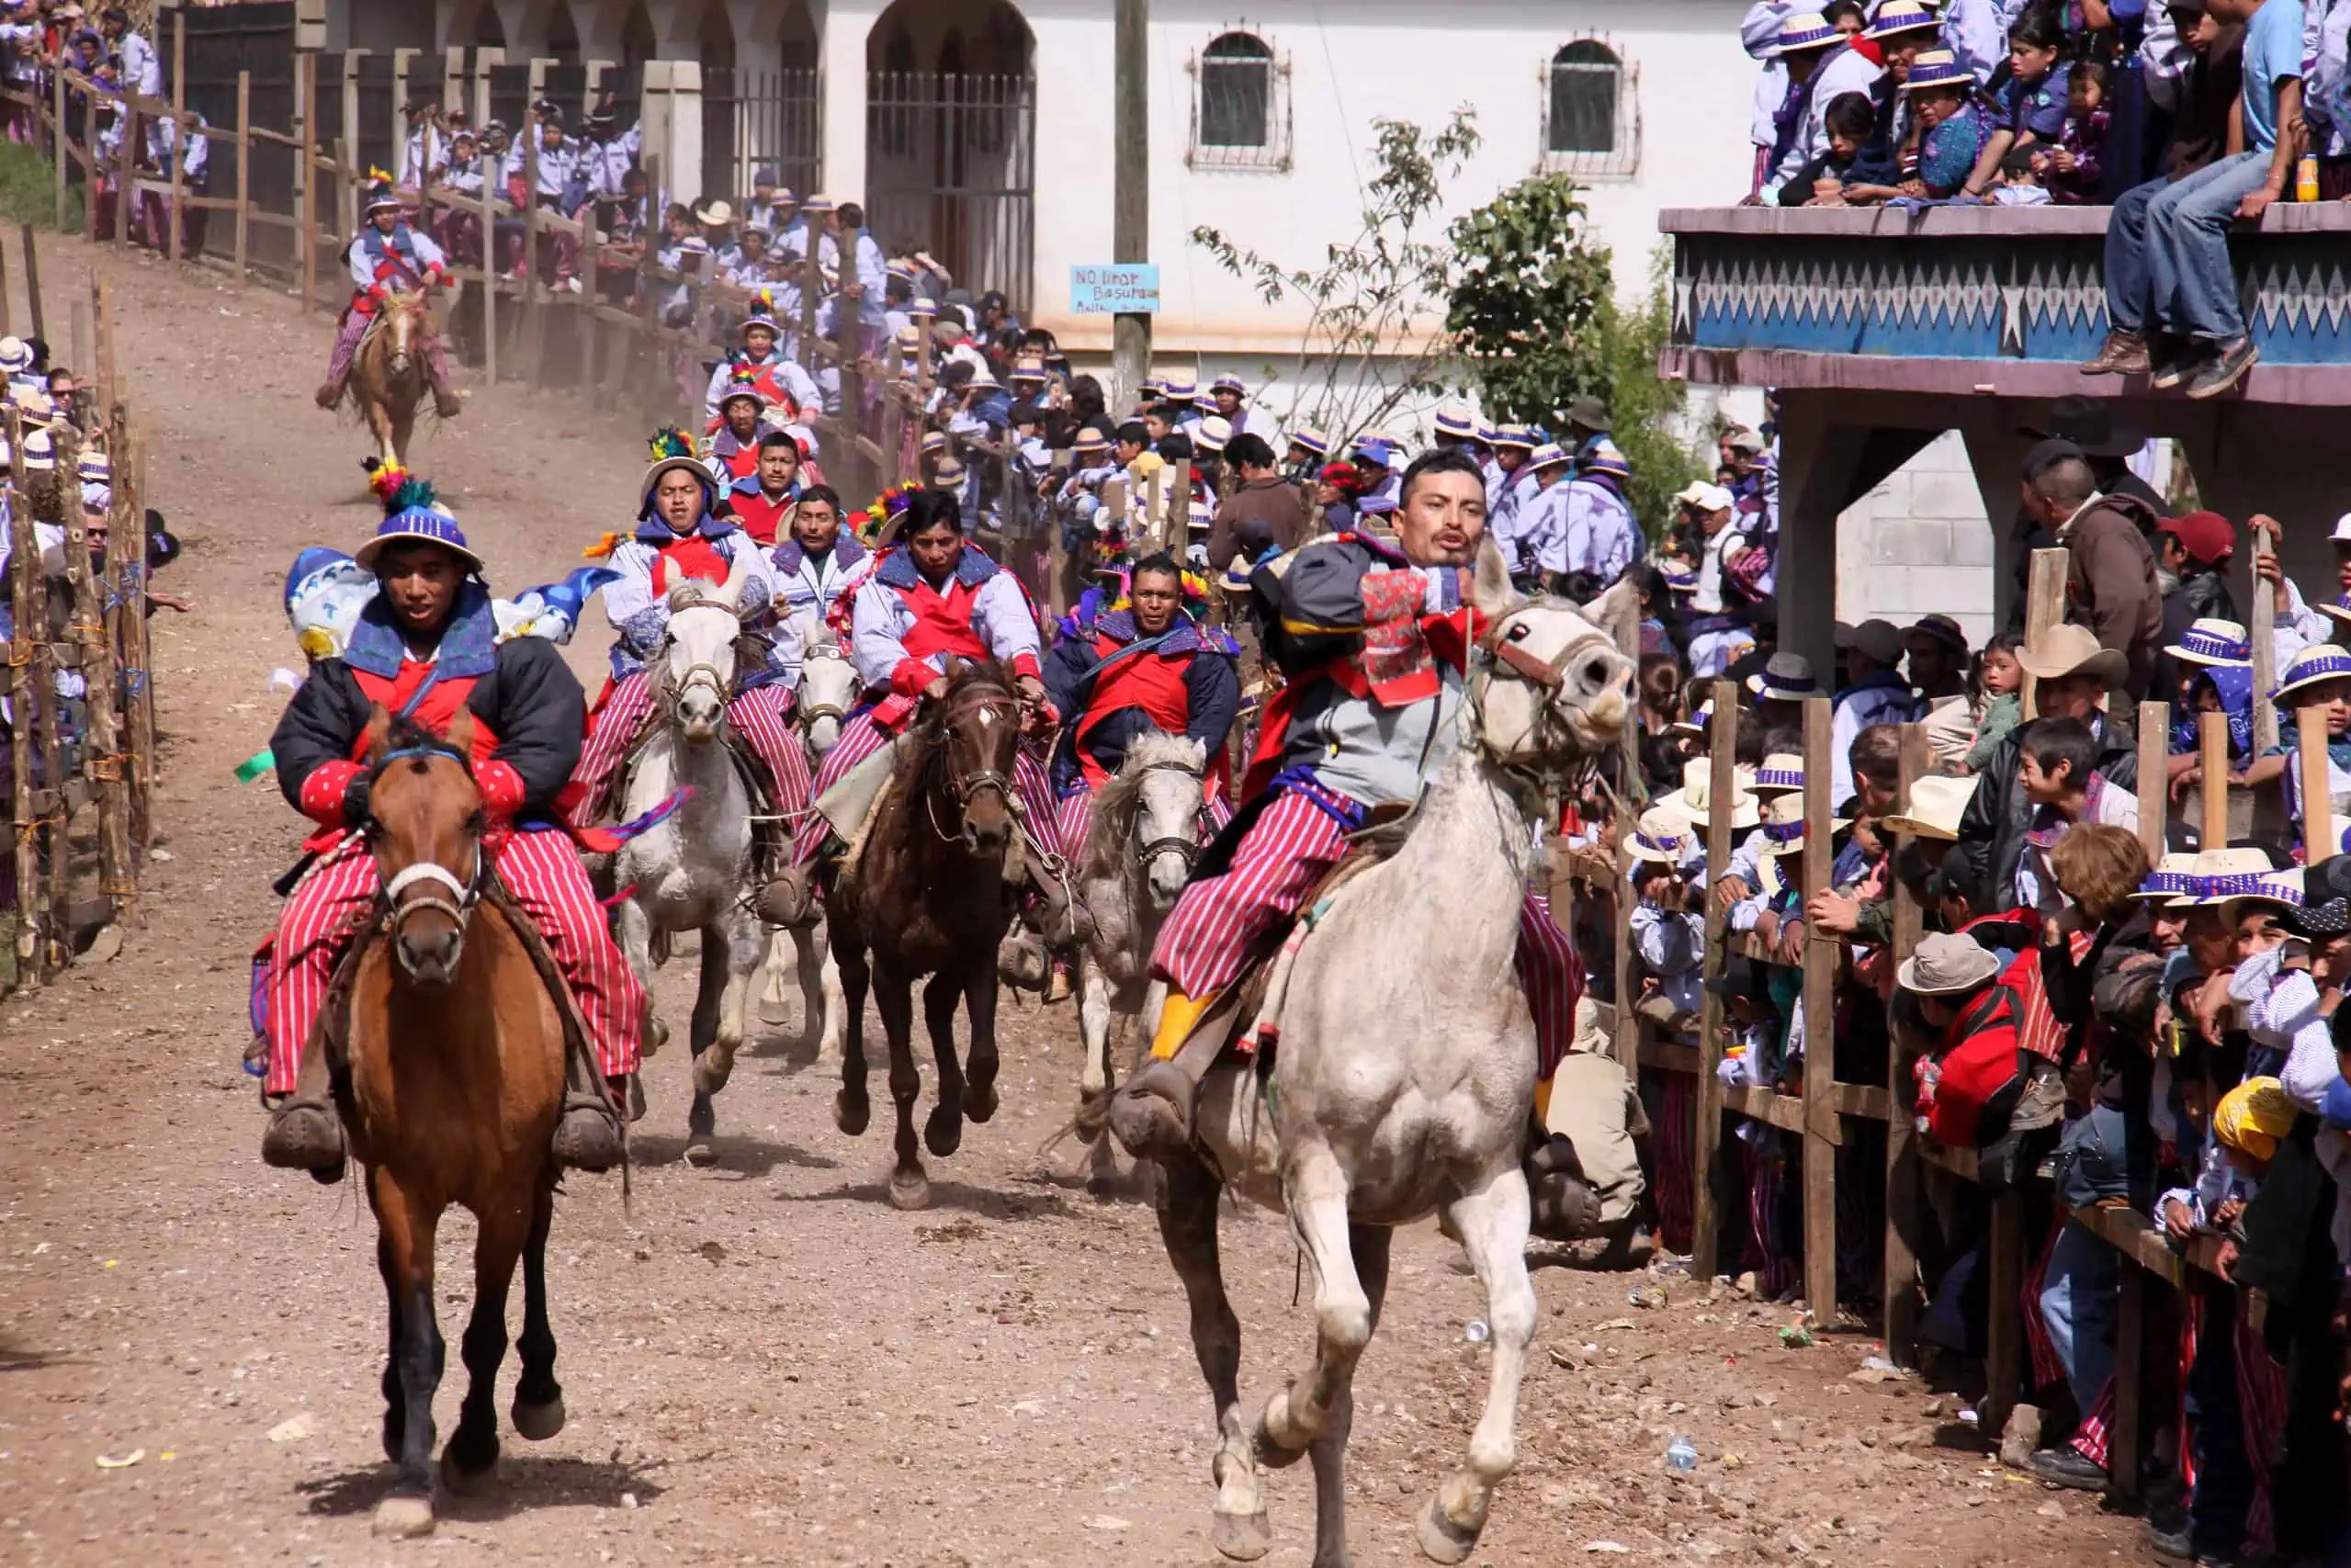 Horse racing with men in traditional Mam Maya clothes riding horses down a narrow track thronged with people.